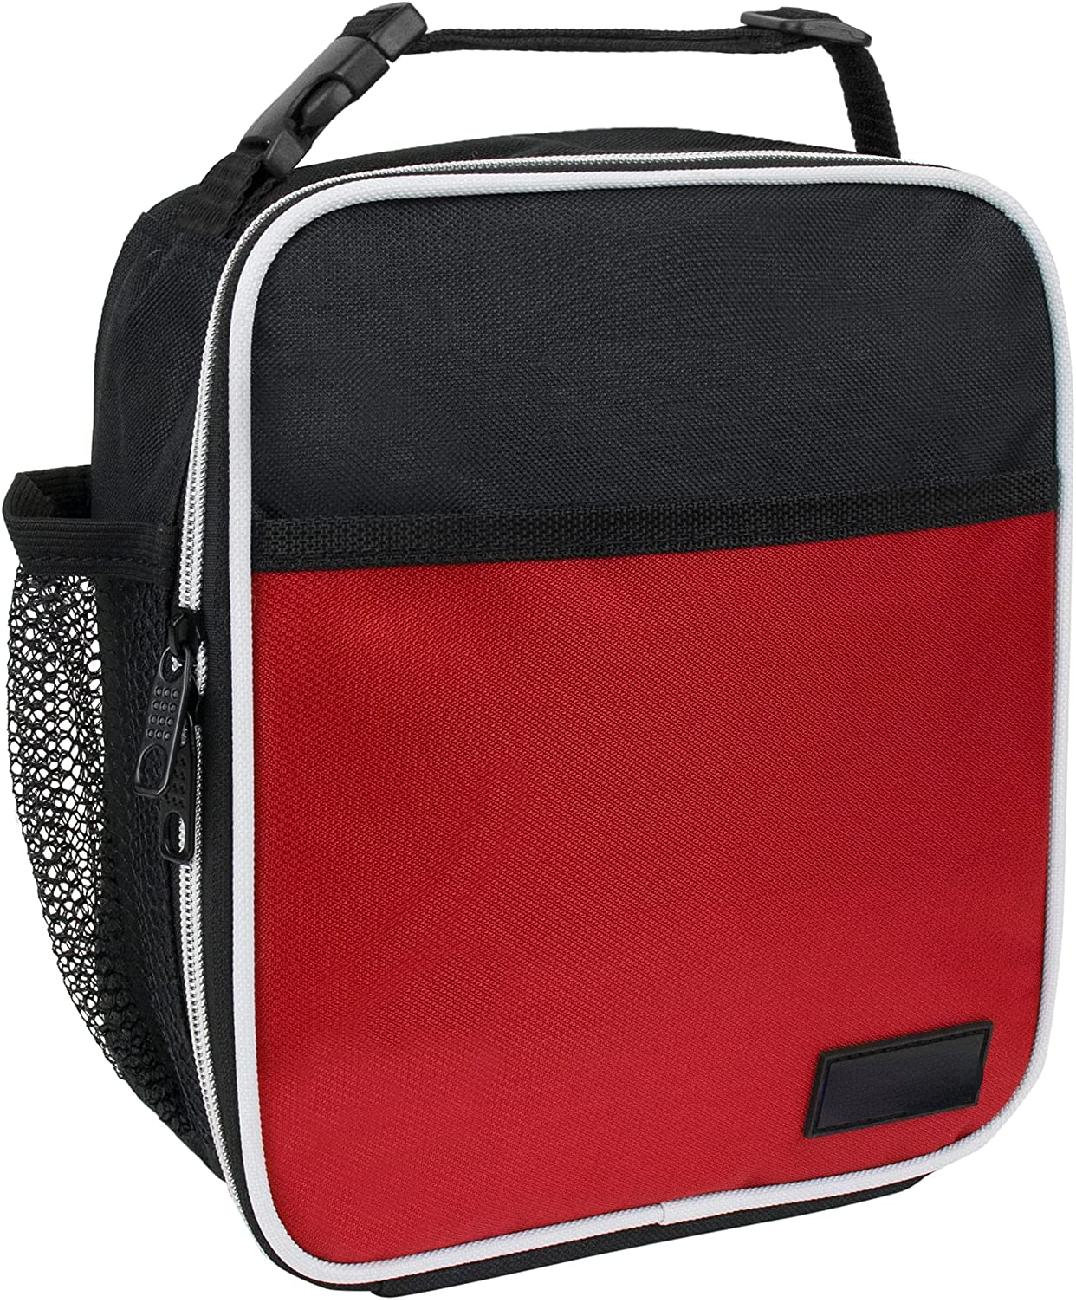 Adventuridge Essentials insulated Lunch Box / Lunch Bag- NEW with tags